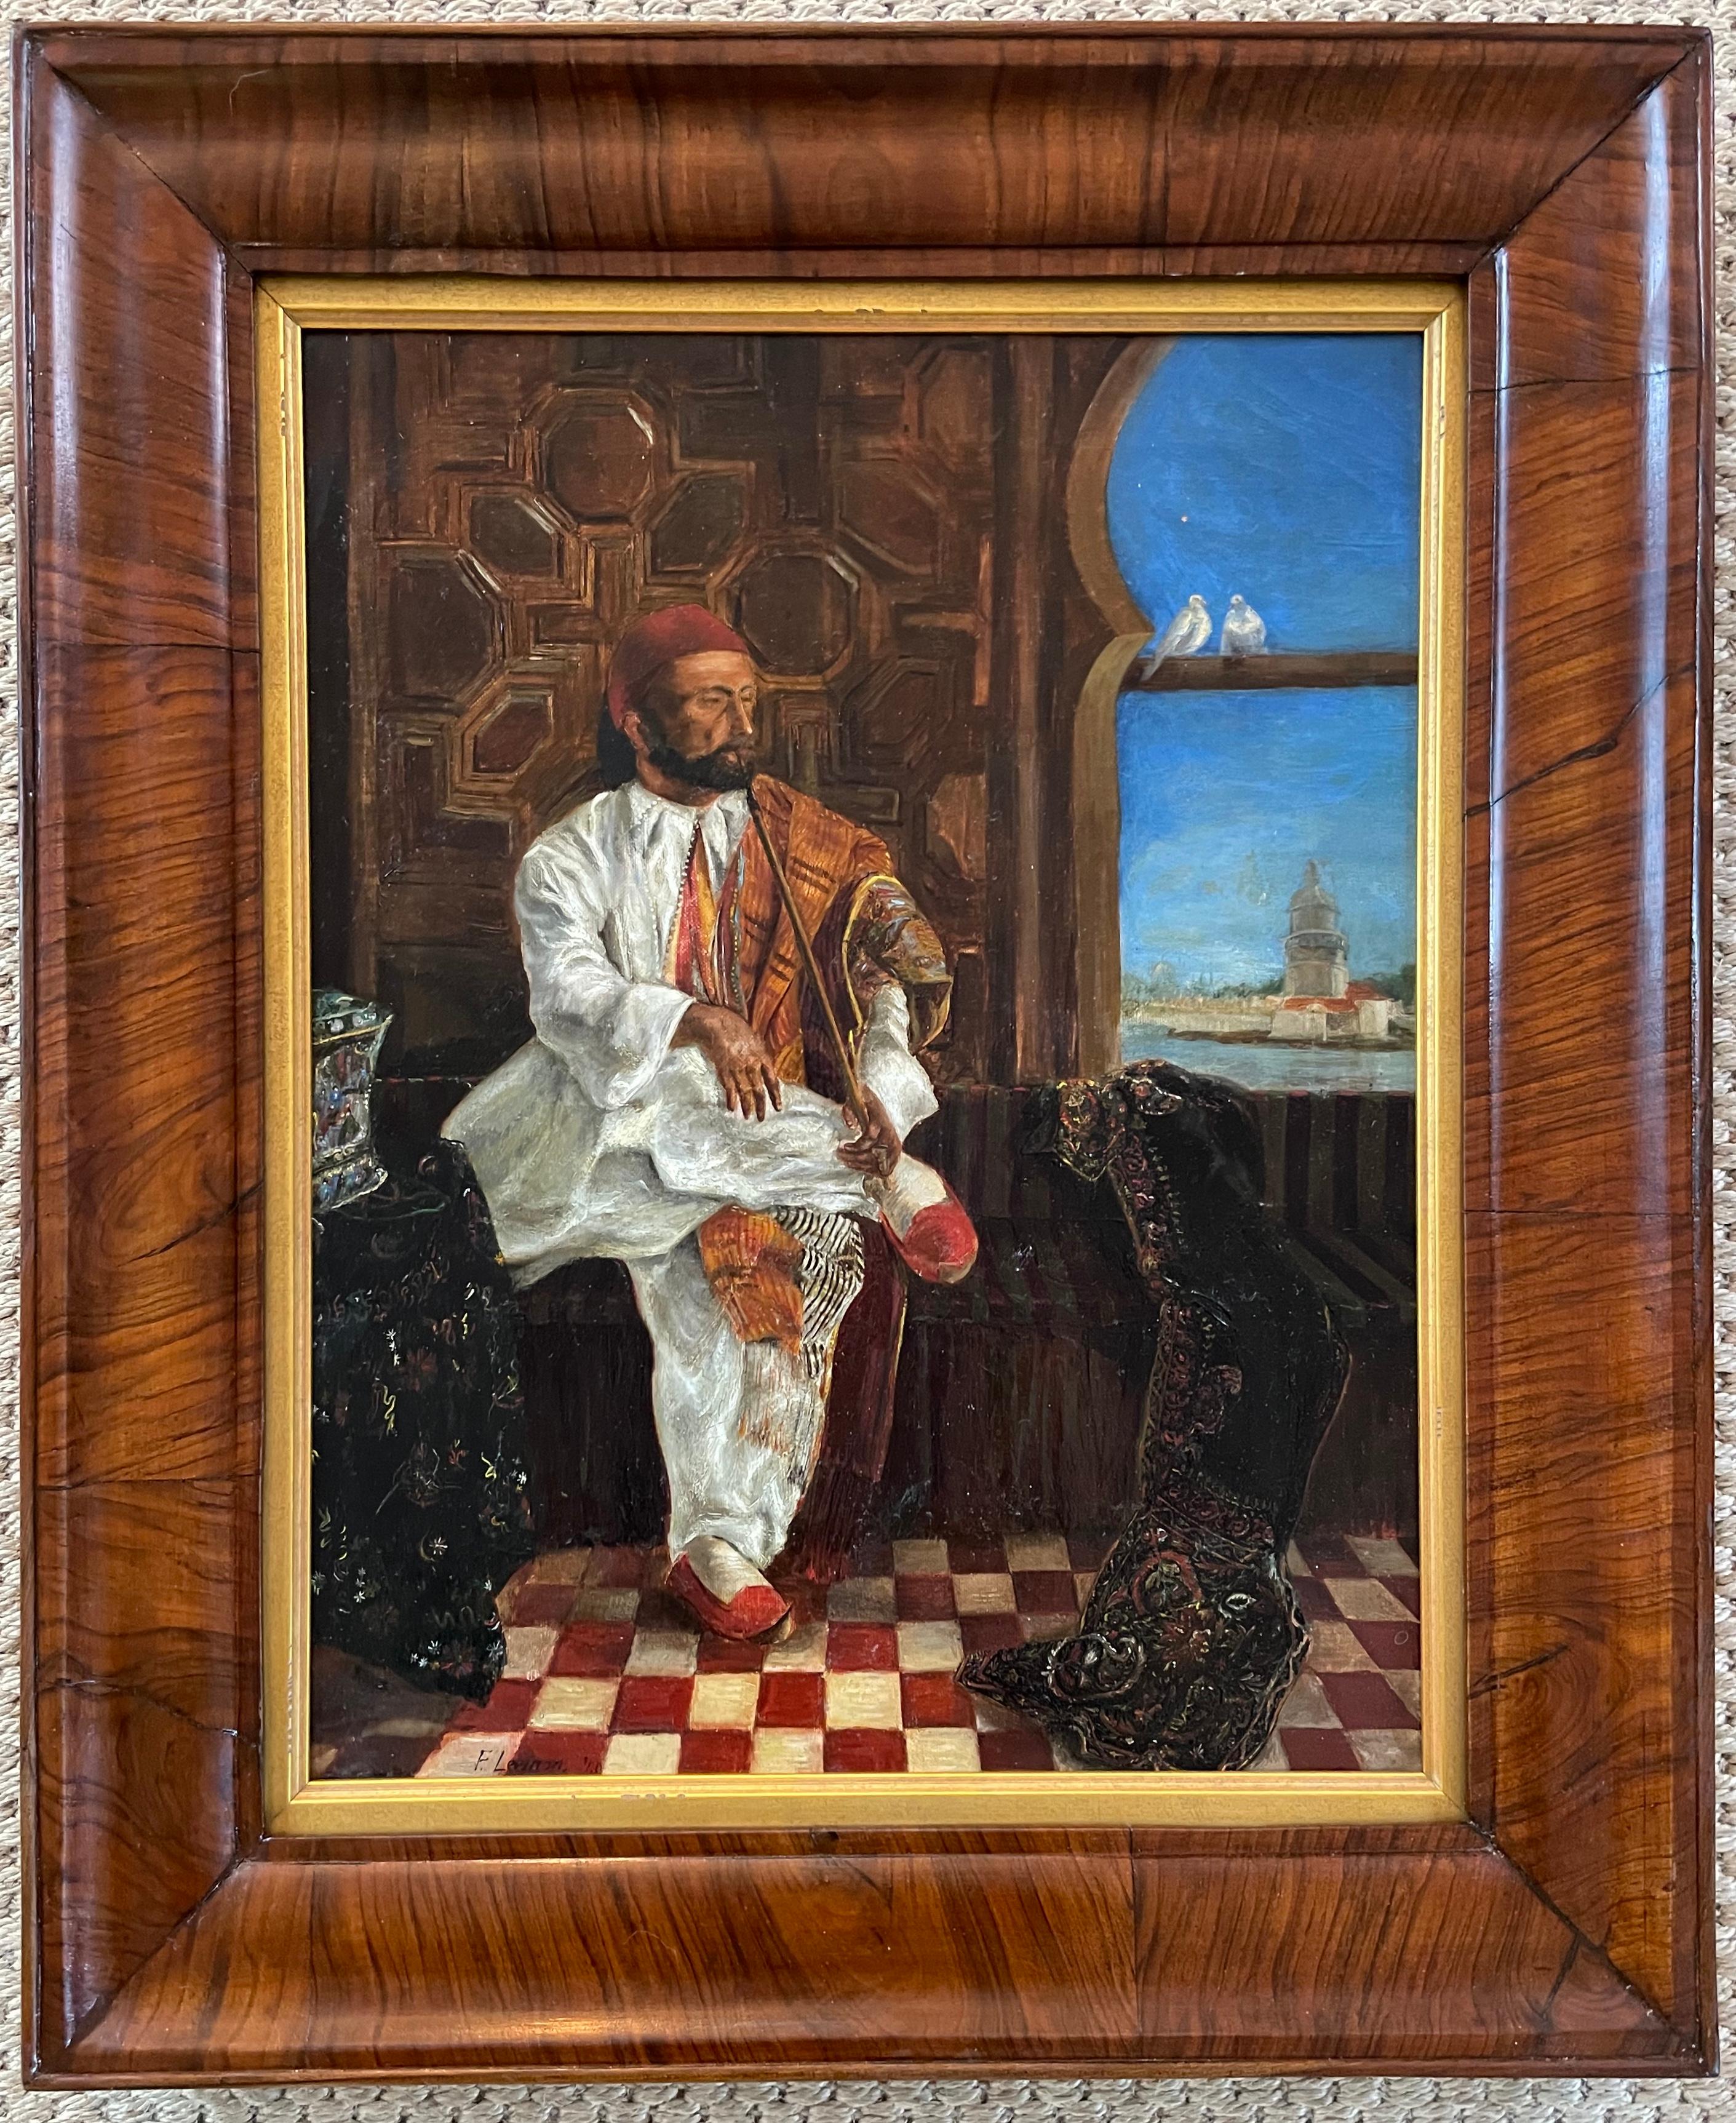 Opium Smoker, F. Leeman, 1860.
Vivid English Orientalist oil of a well attired Turk in richly decorated opulent setting with red and white checkered marble tile floor, and wood paneled walls, seated with hookah before arabesque window with 2 doves